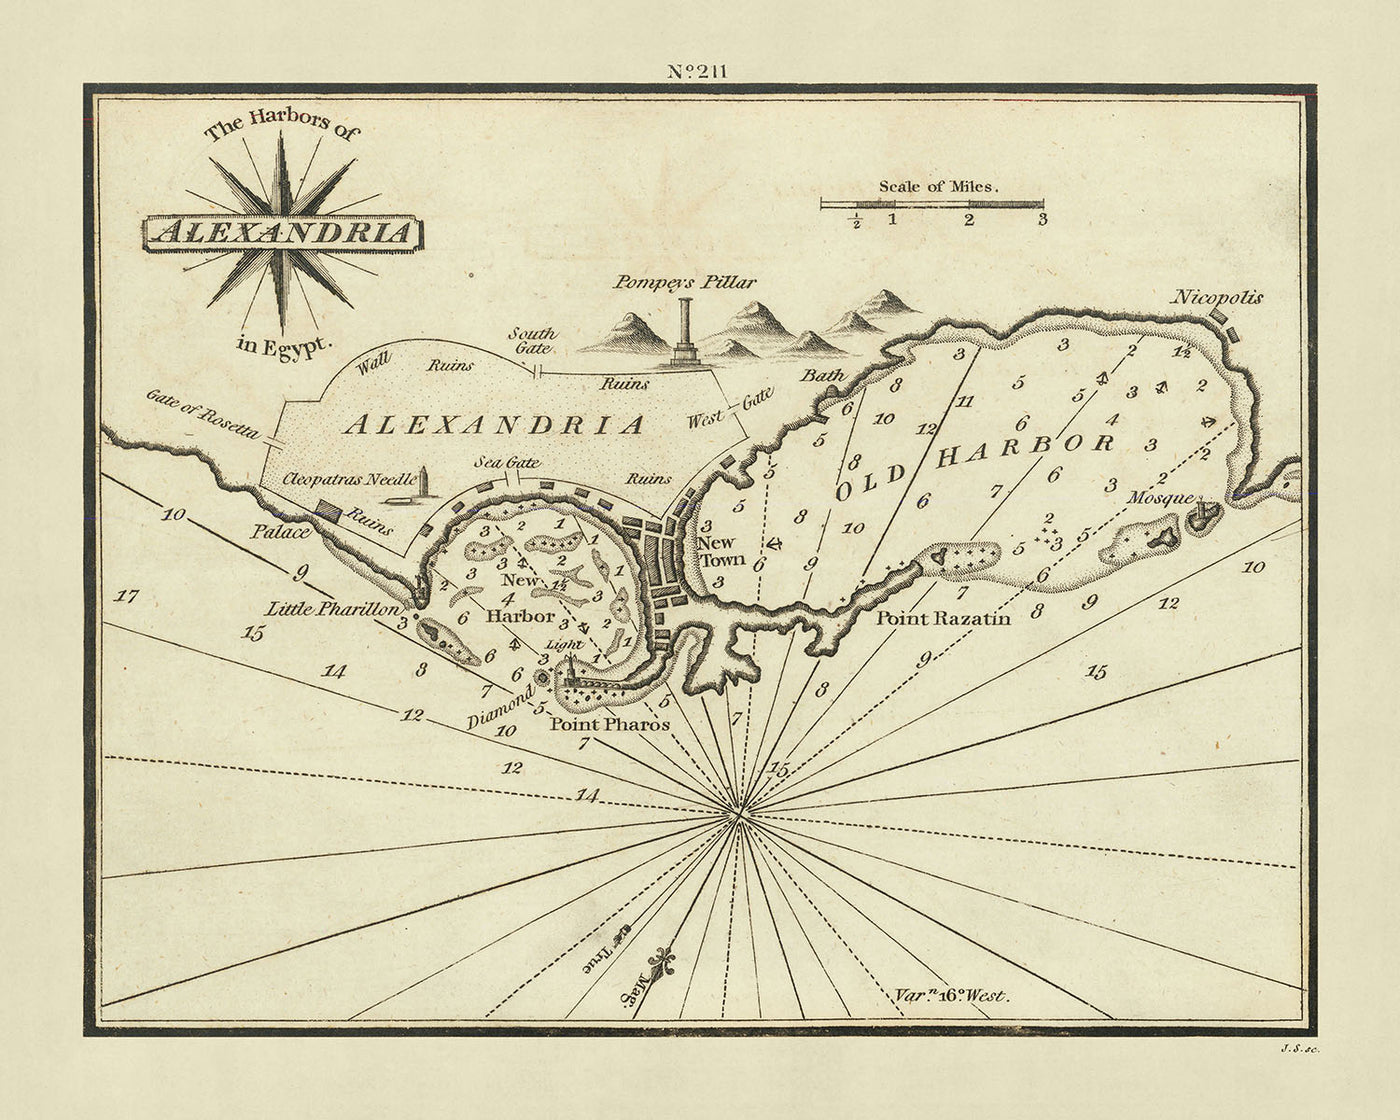 Old Harbour of Alexandria Nautical Chart by Heather, 1802: Cleopatra's Needle, Pompey's Pillar, Mosque